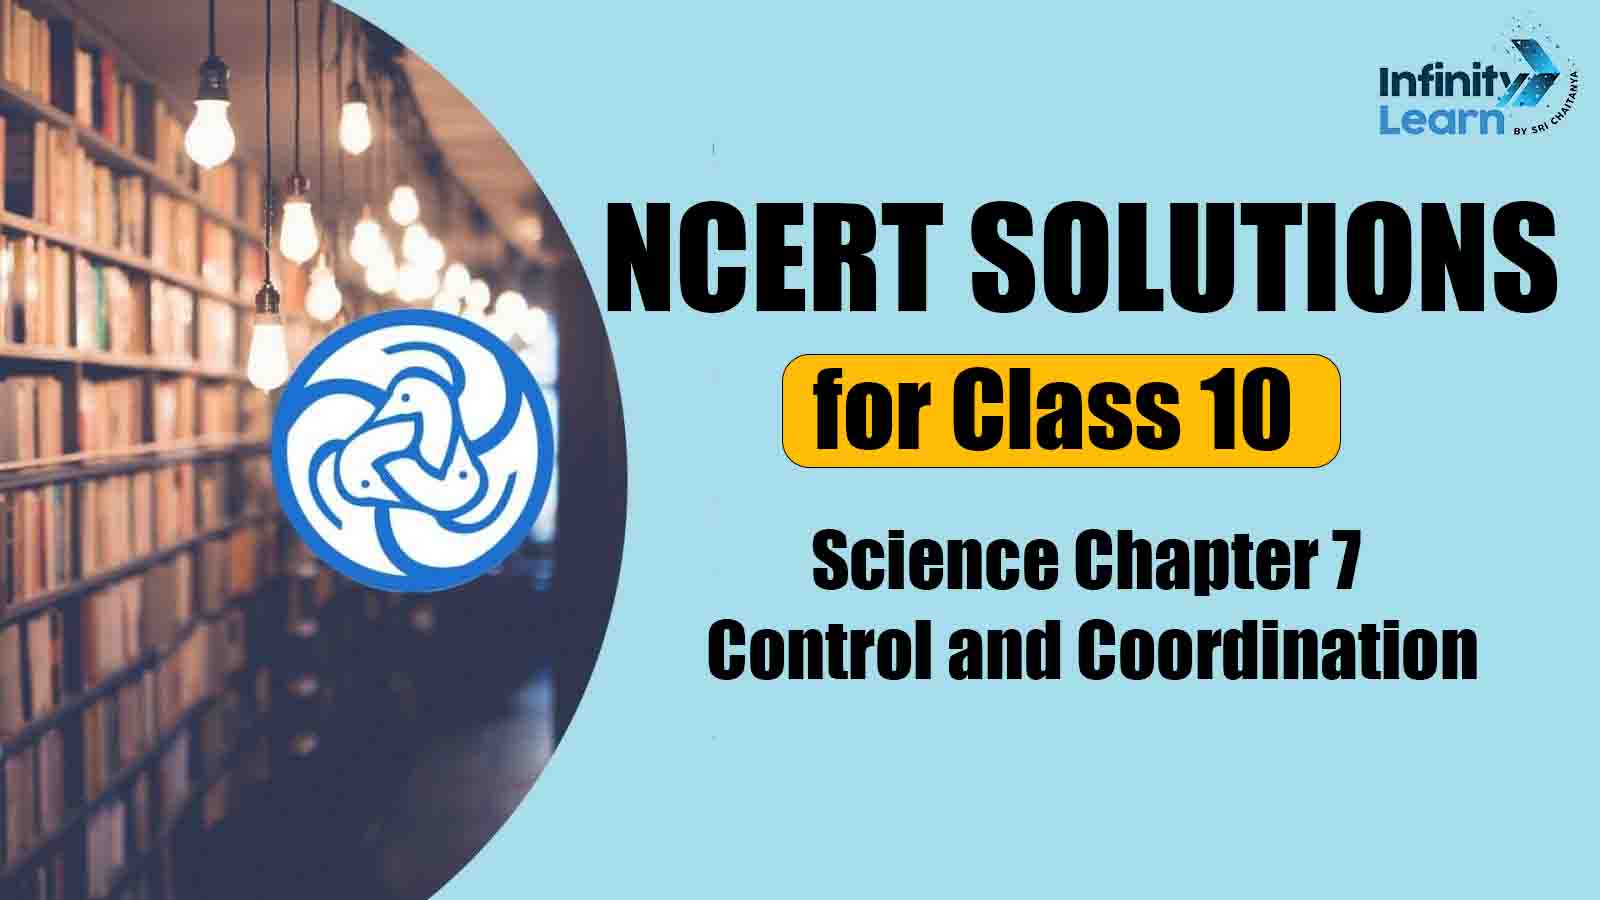 NCERT Solutions for Class 10 Science Chapter 7